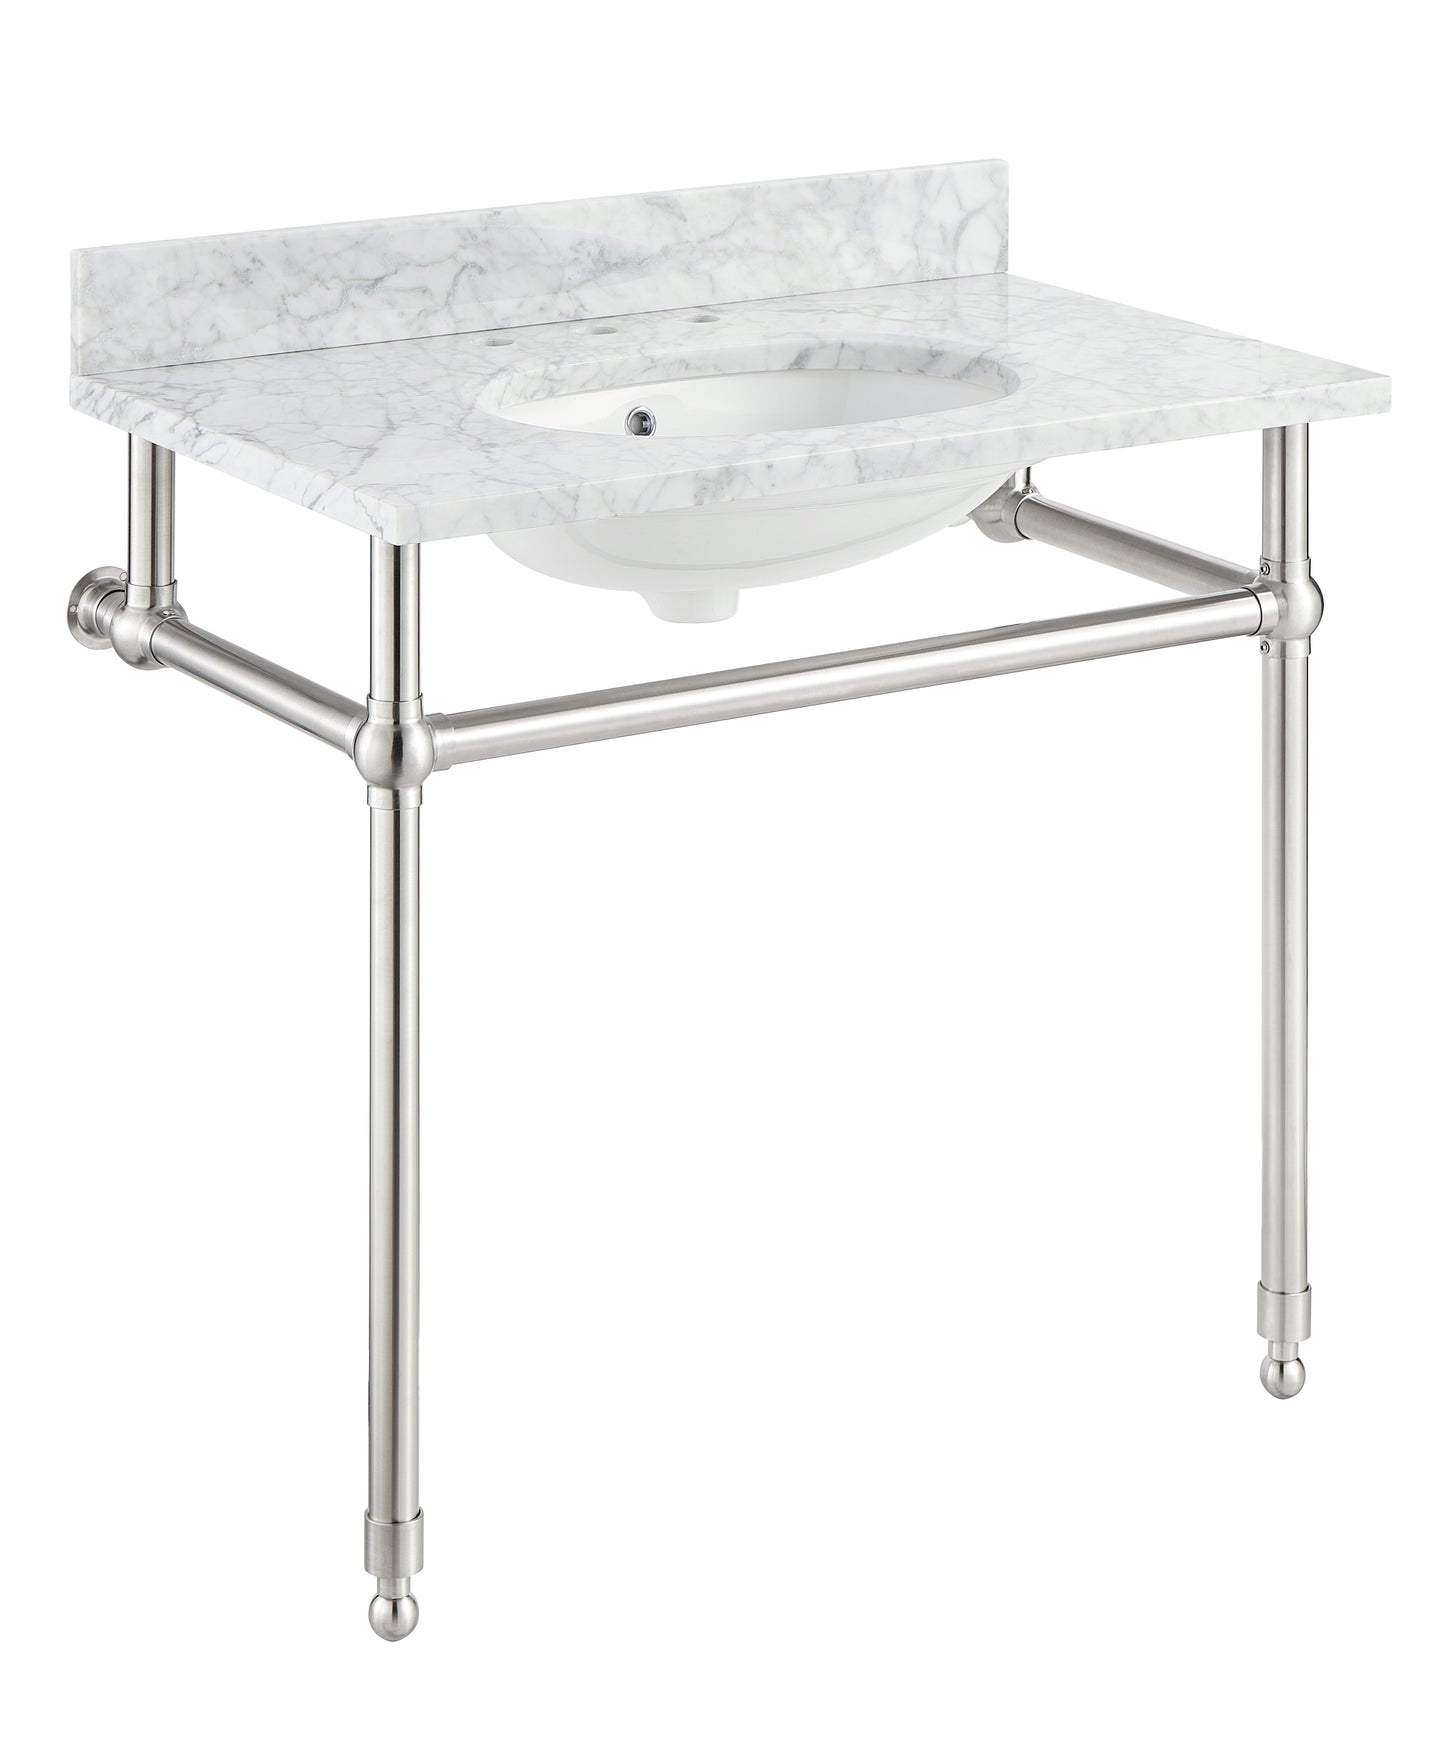 CS-FGC004-BN - Verona 34.5 in. Console Sink in Brushed Nickel with Carrara White Counter Top